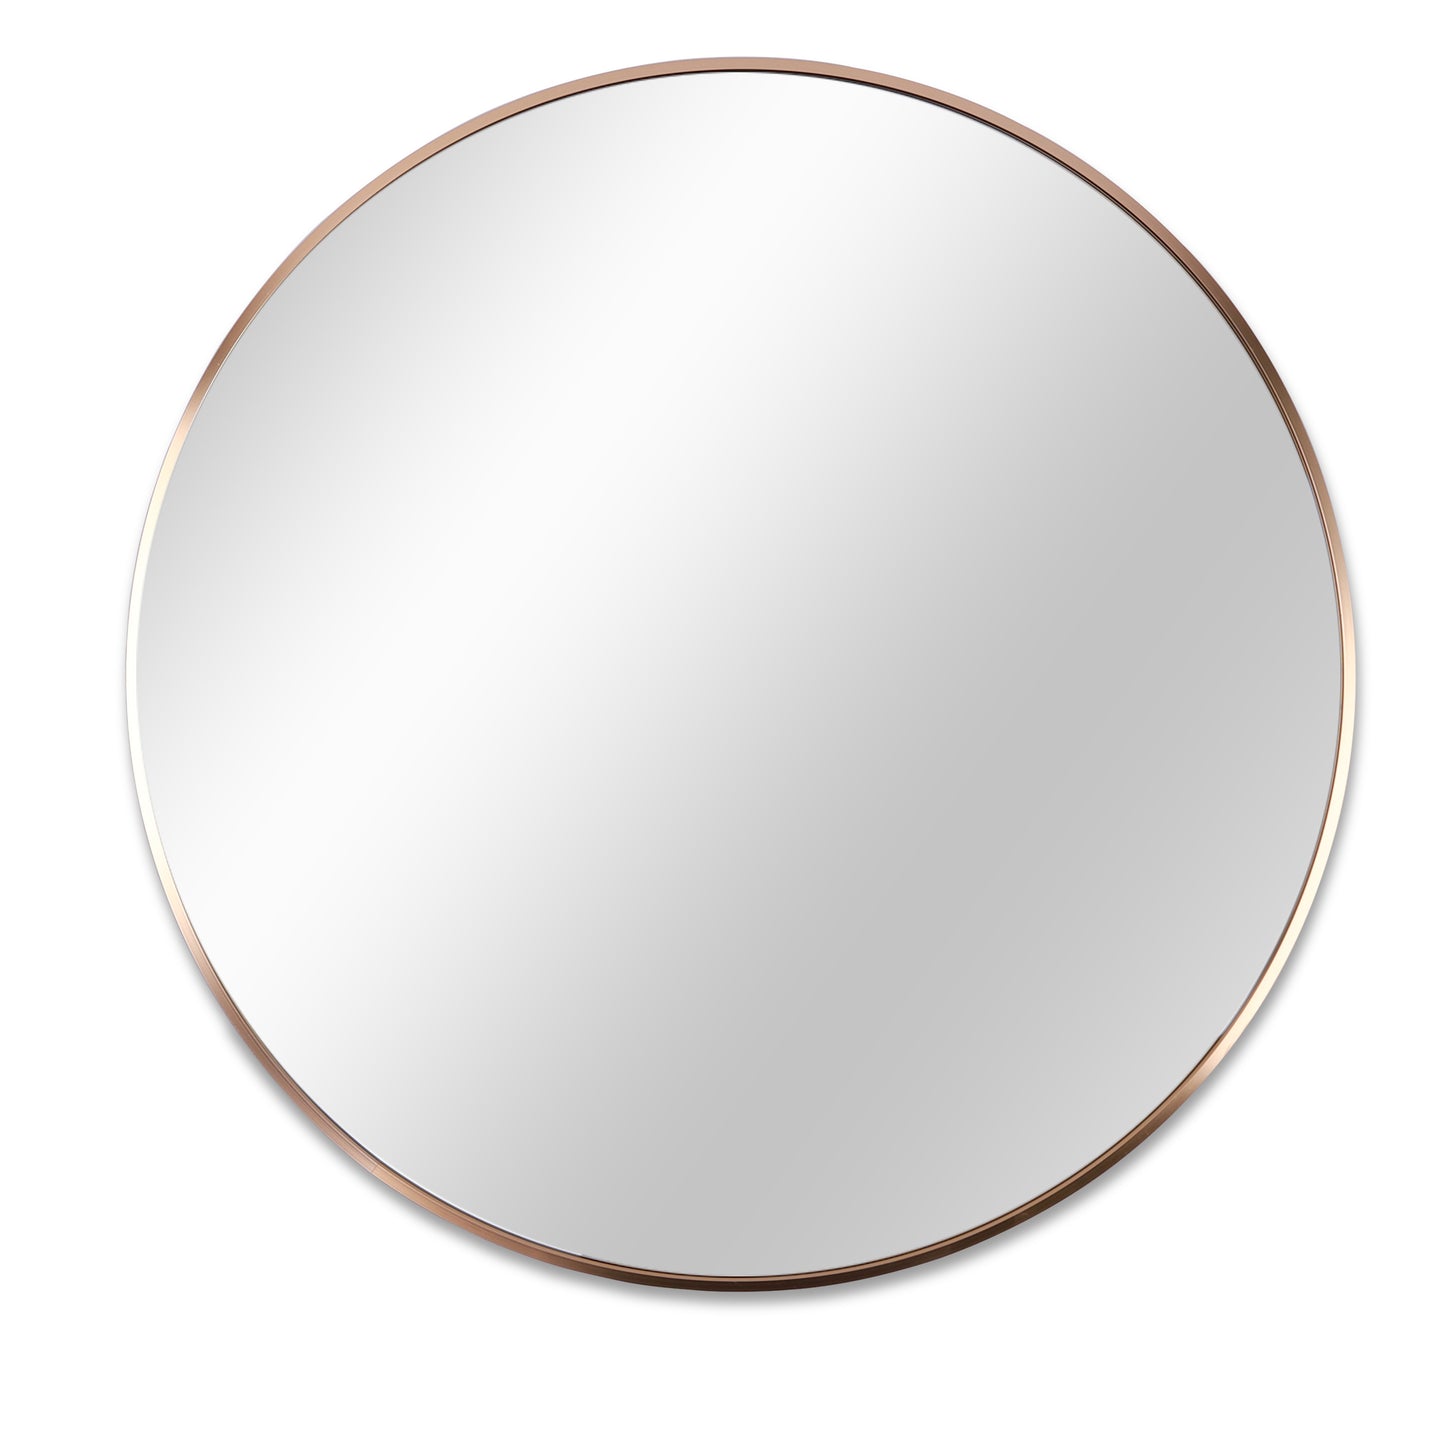 Circle Mirror 30 Inch, Gold Round Wall Mirror Suitable for Bedroom, Living Room, Bathroom, Entryway Wall Decor and More, Brushed Aluminum Frame Large Circle Mirrors for Wall